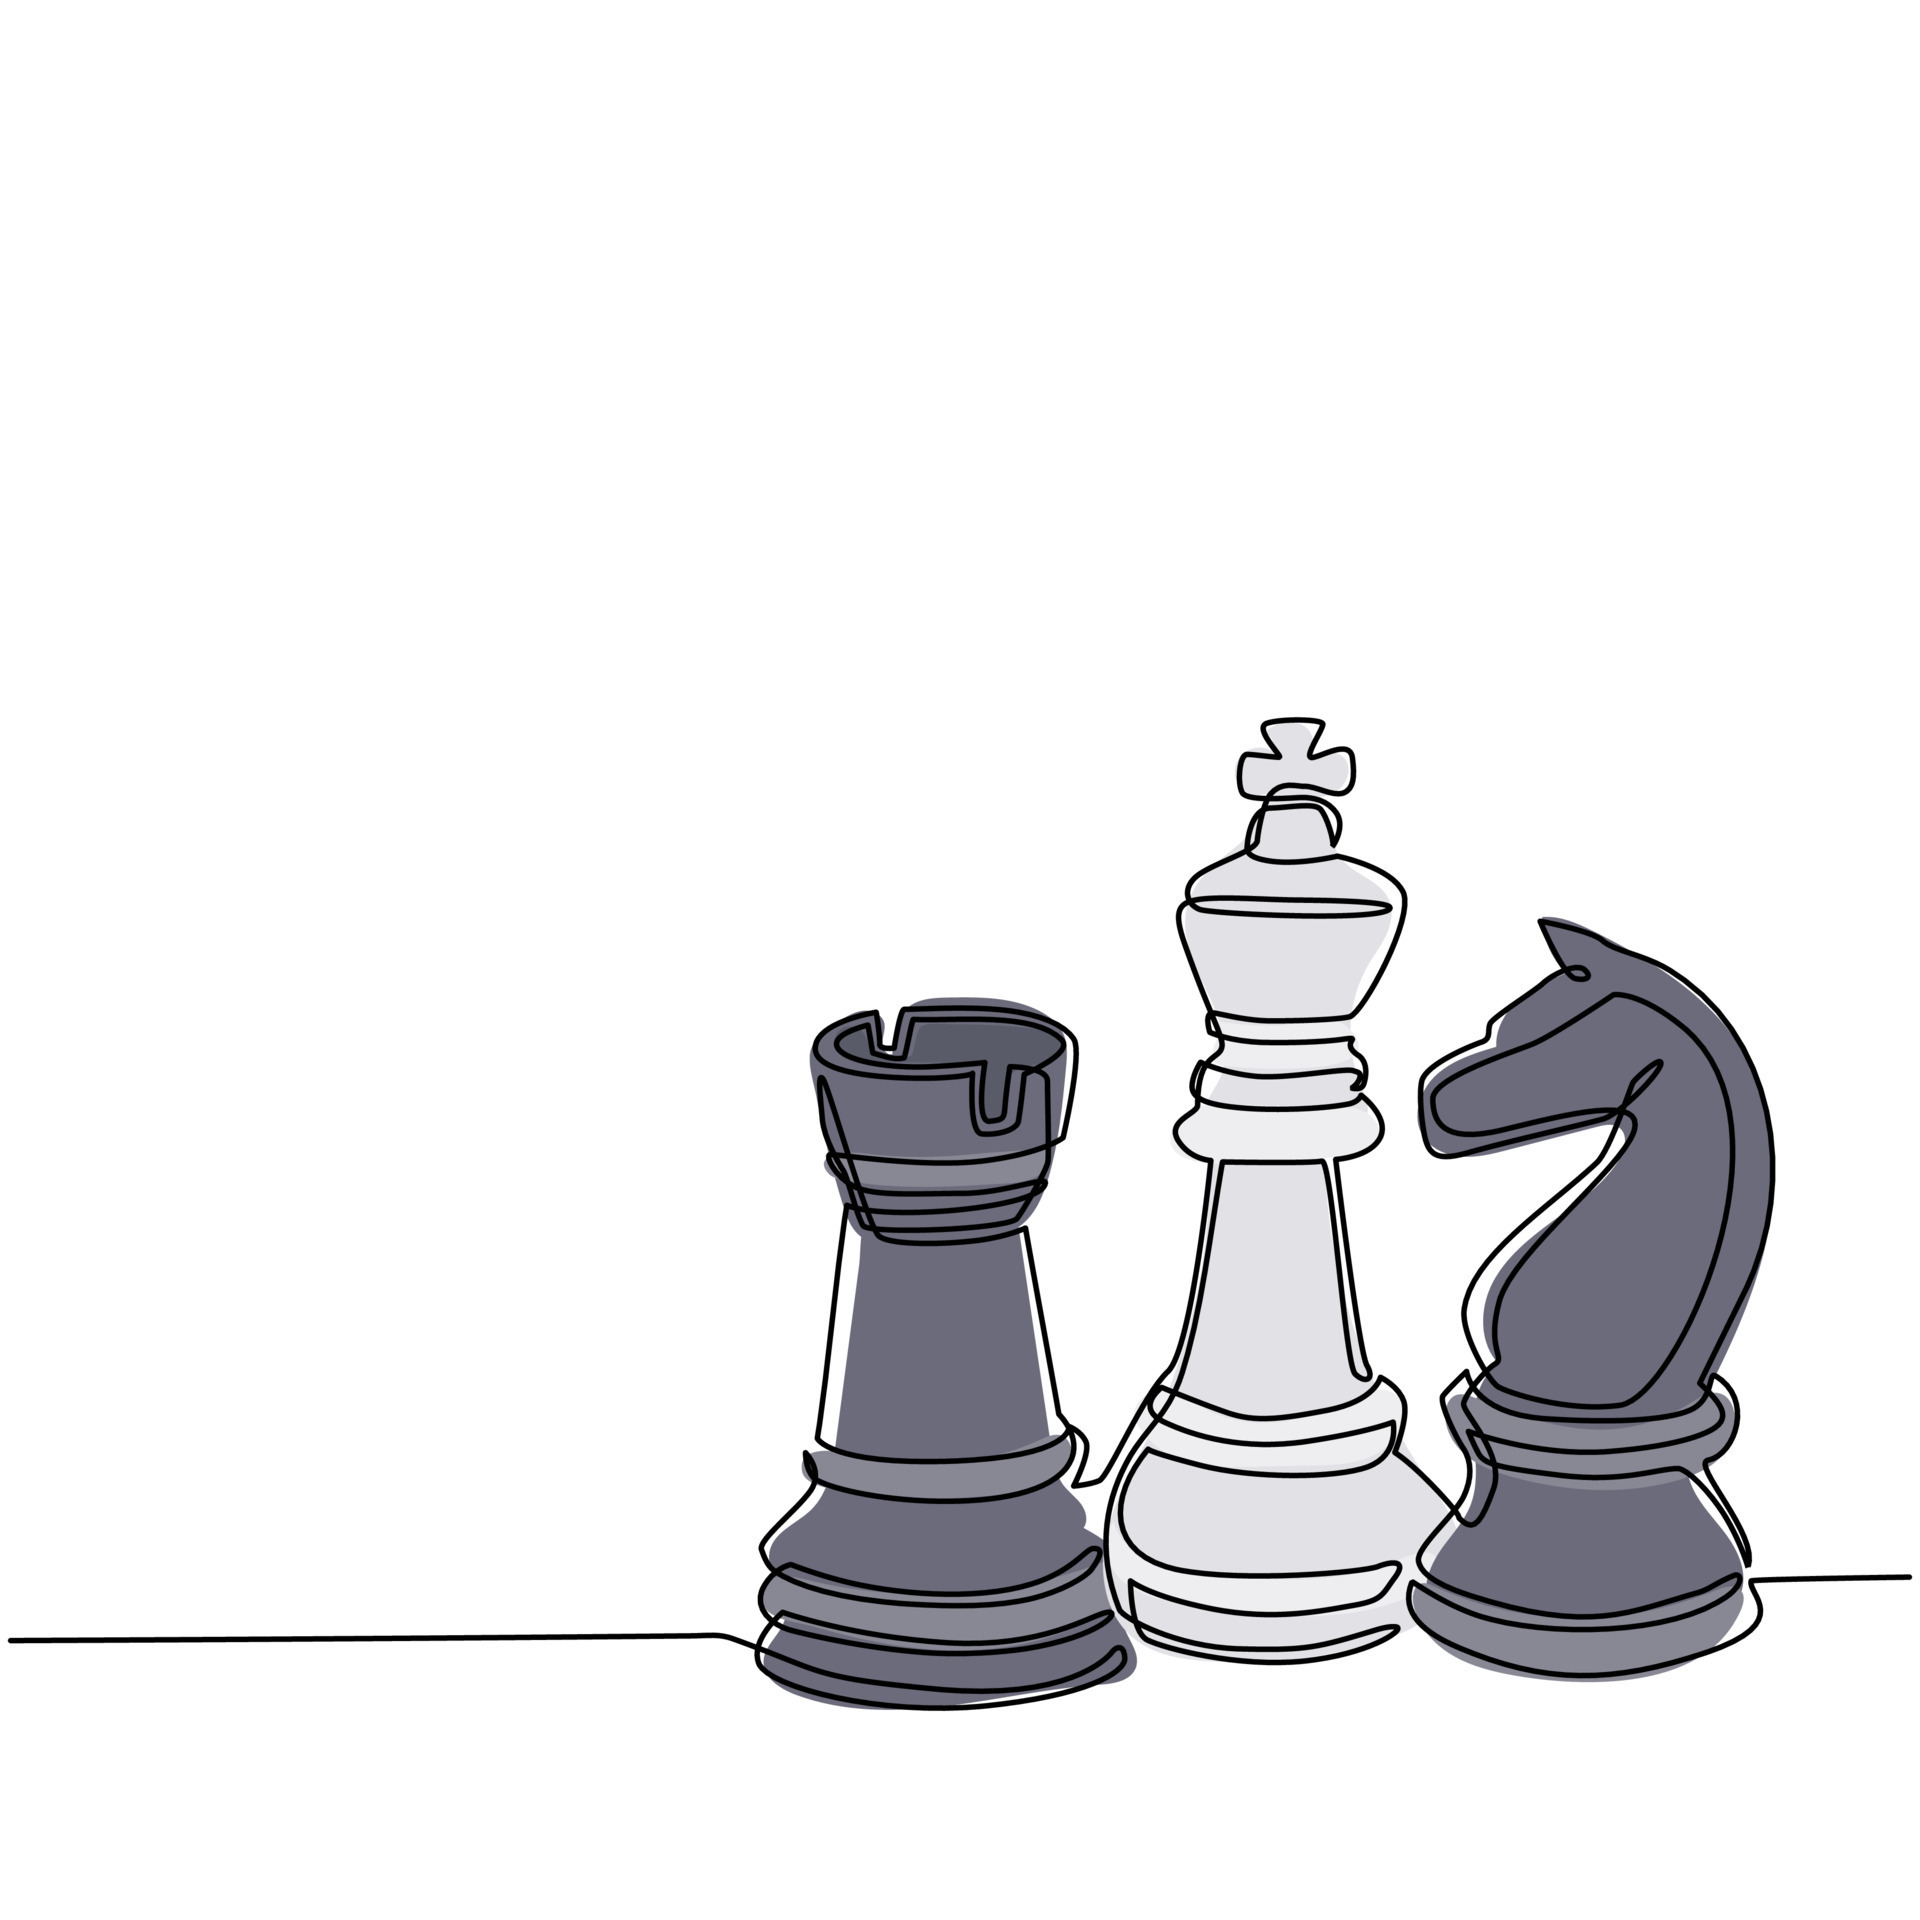 Chess king and queen icon. Simple game element illustration. Game